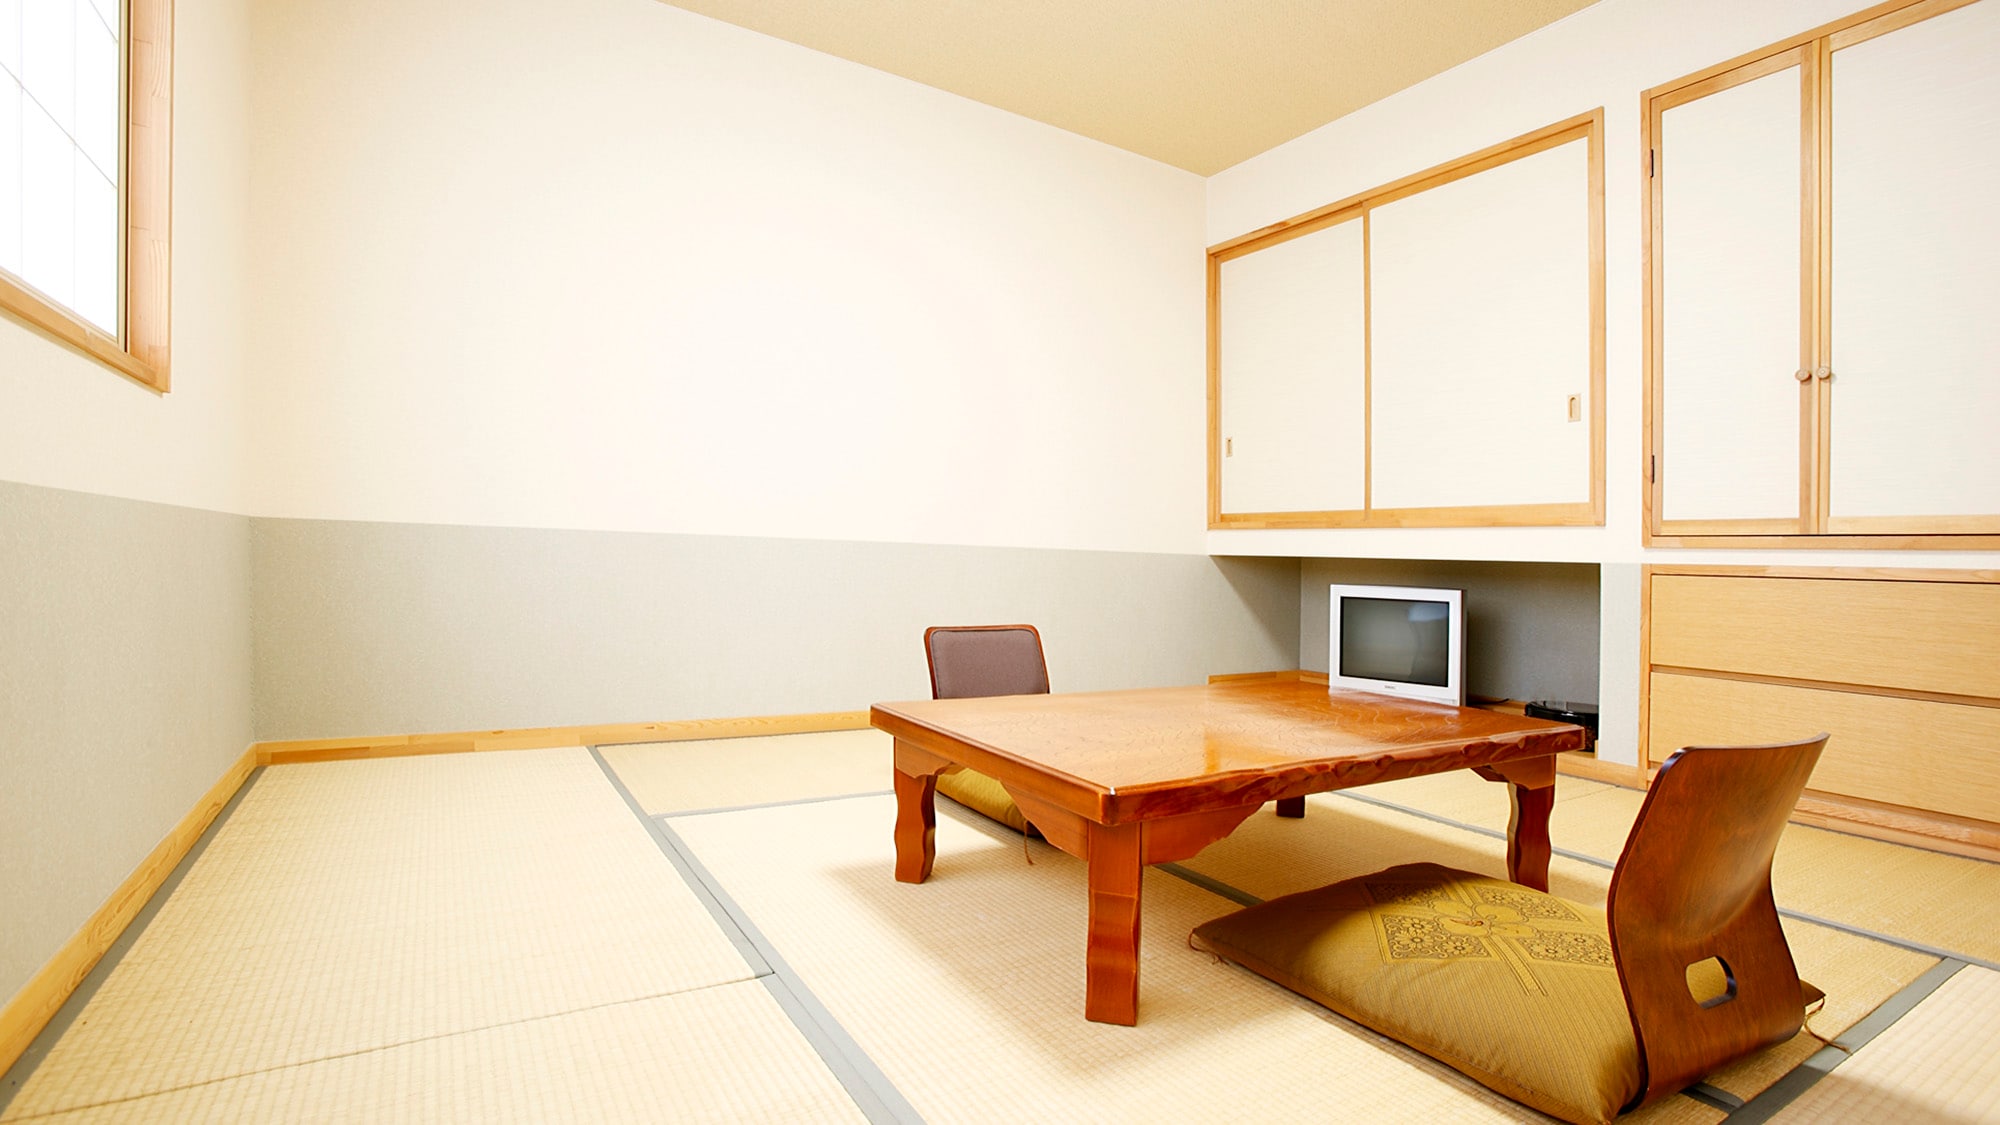 * Japanese-style room with 8 tatami mats / A simple tatami room with bright sunlight shining through the shoji window. Recommended for couples and couples.